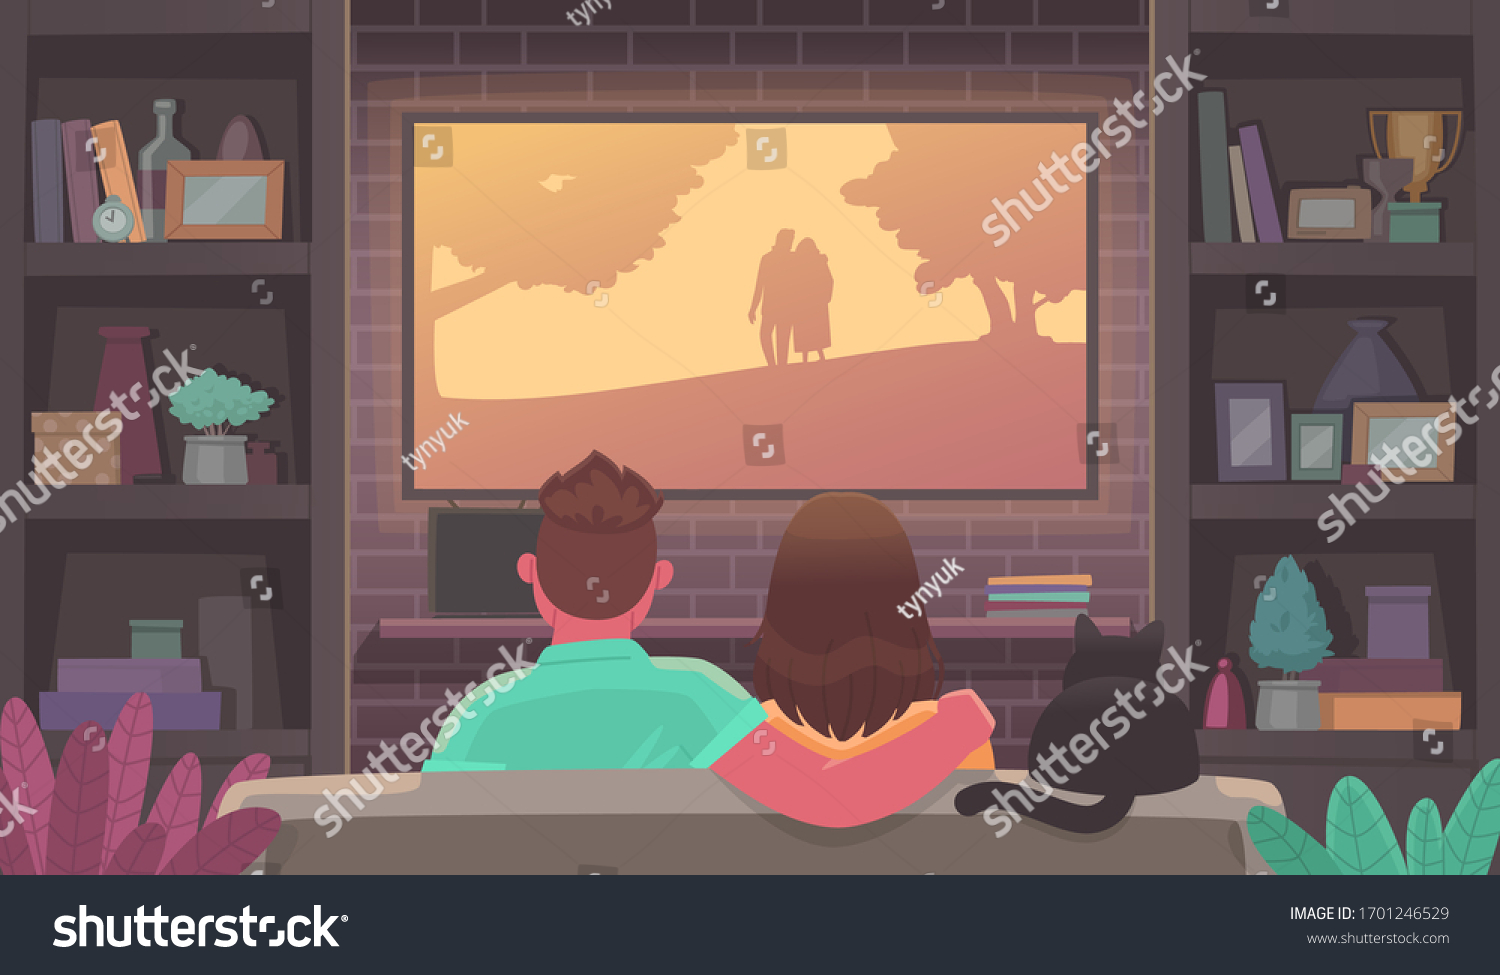 Movies To Watch Together